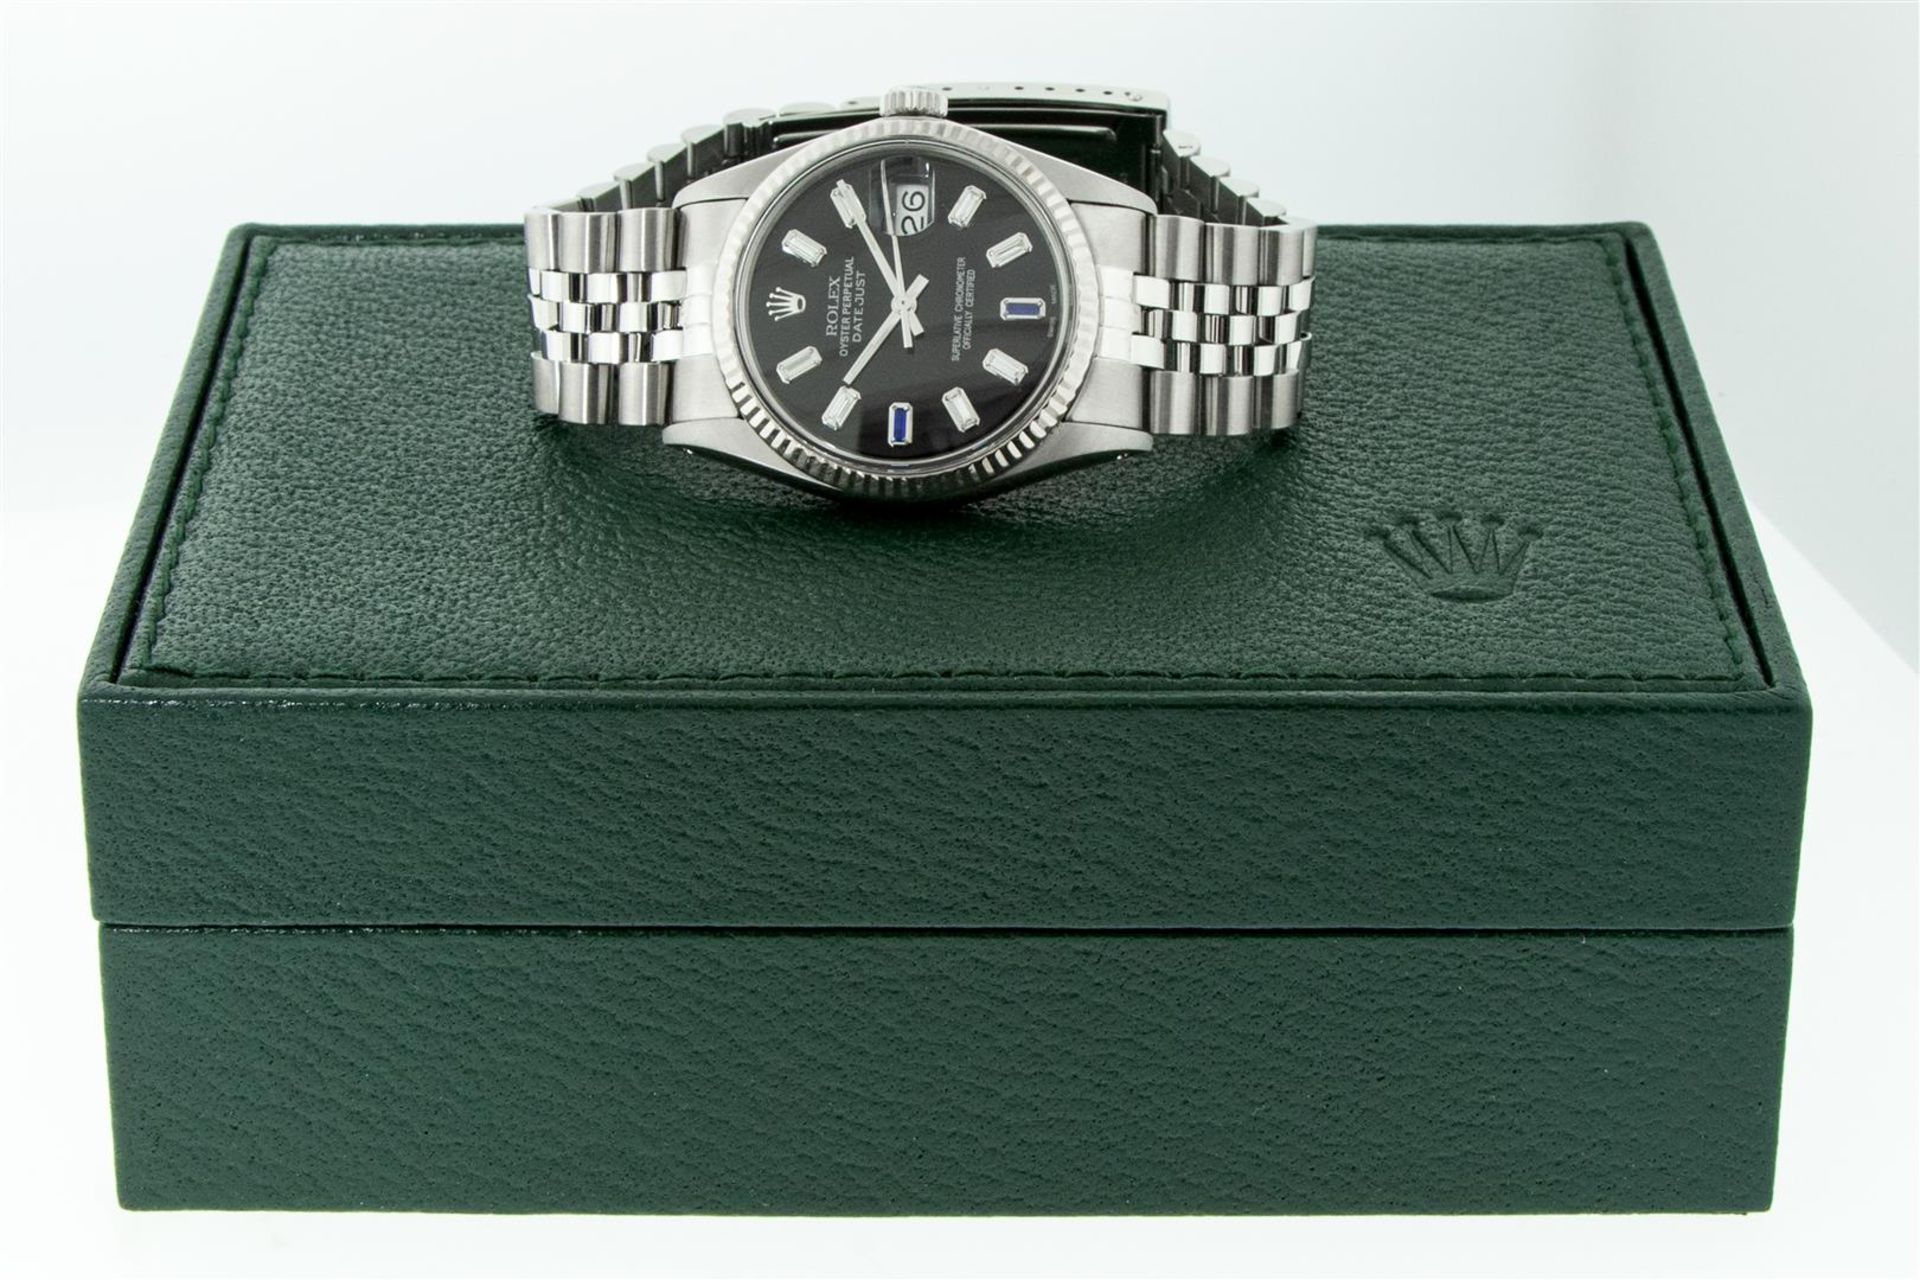 Rolex Mens Stainless Steel 36mm Black Diamond Dial Datejust Wristwatch - Image 4 of 14